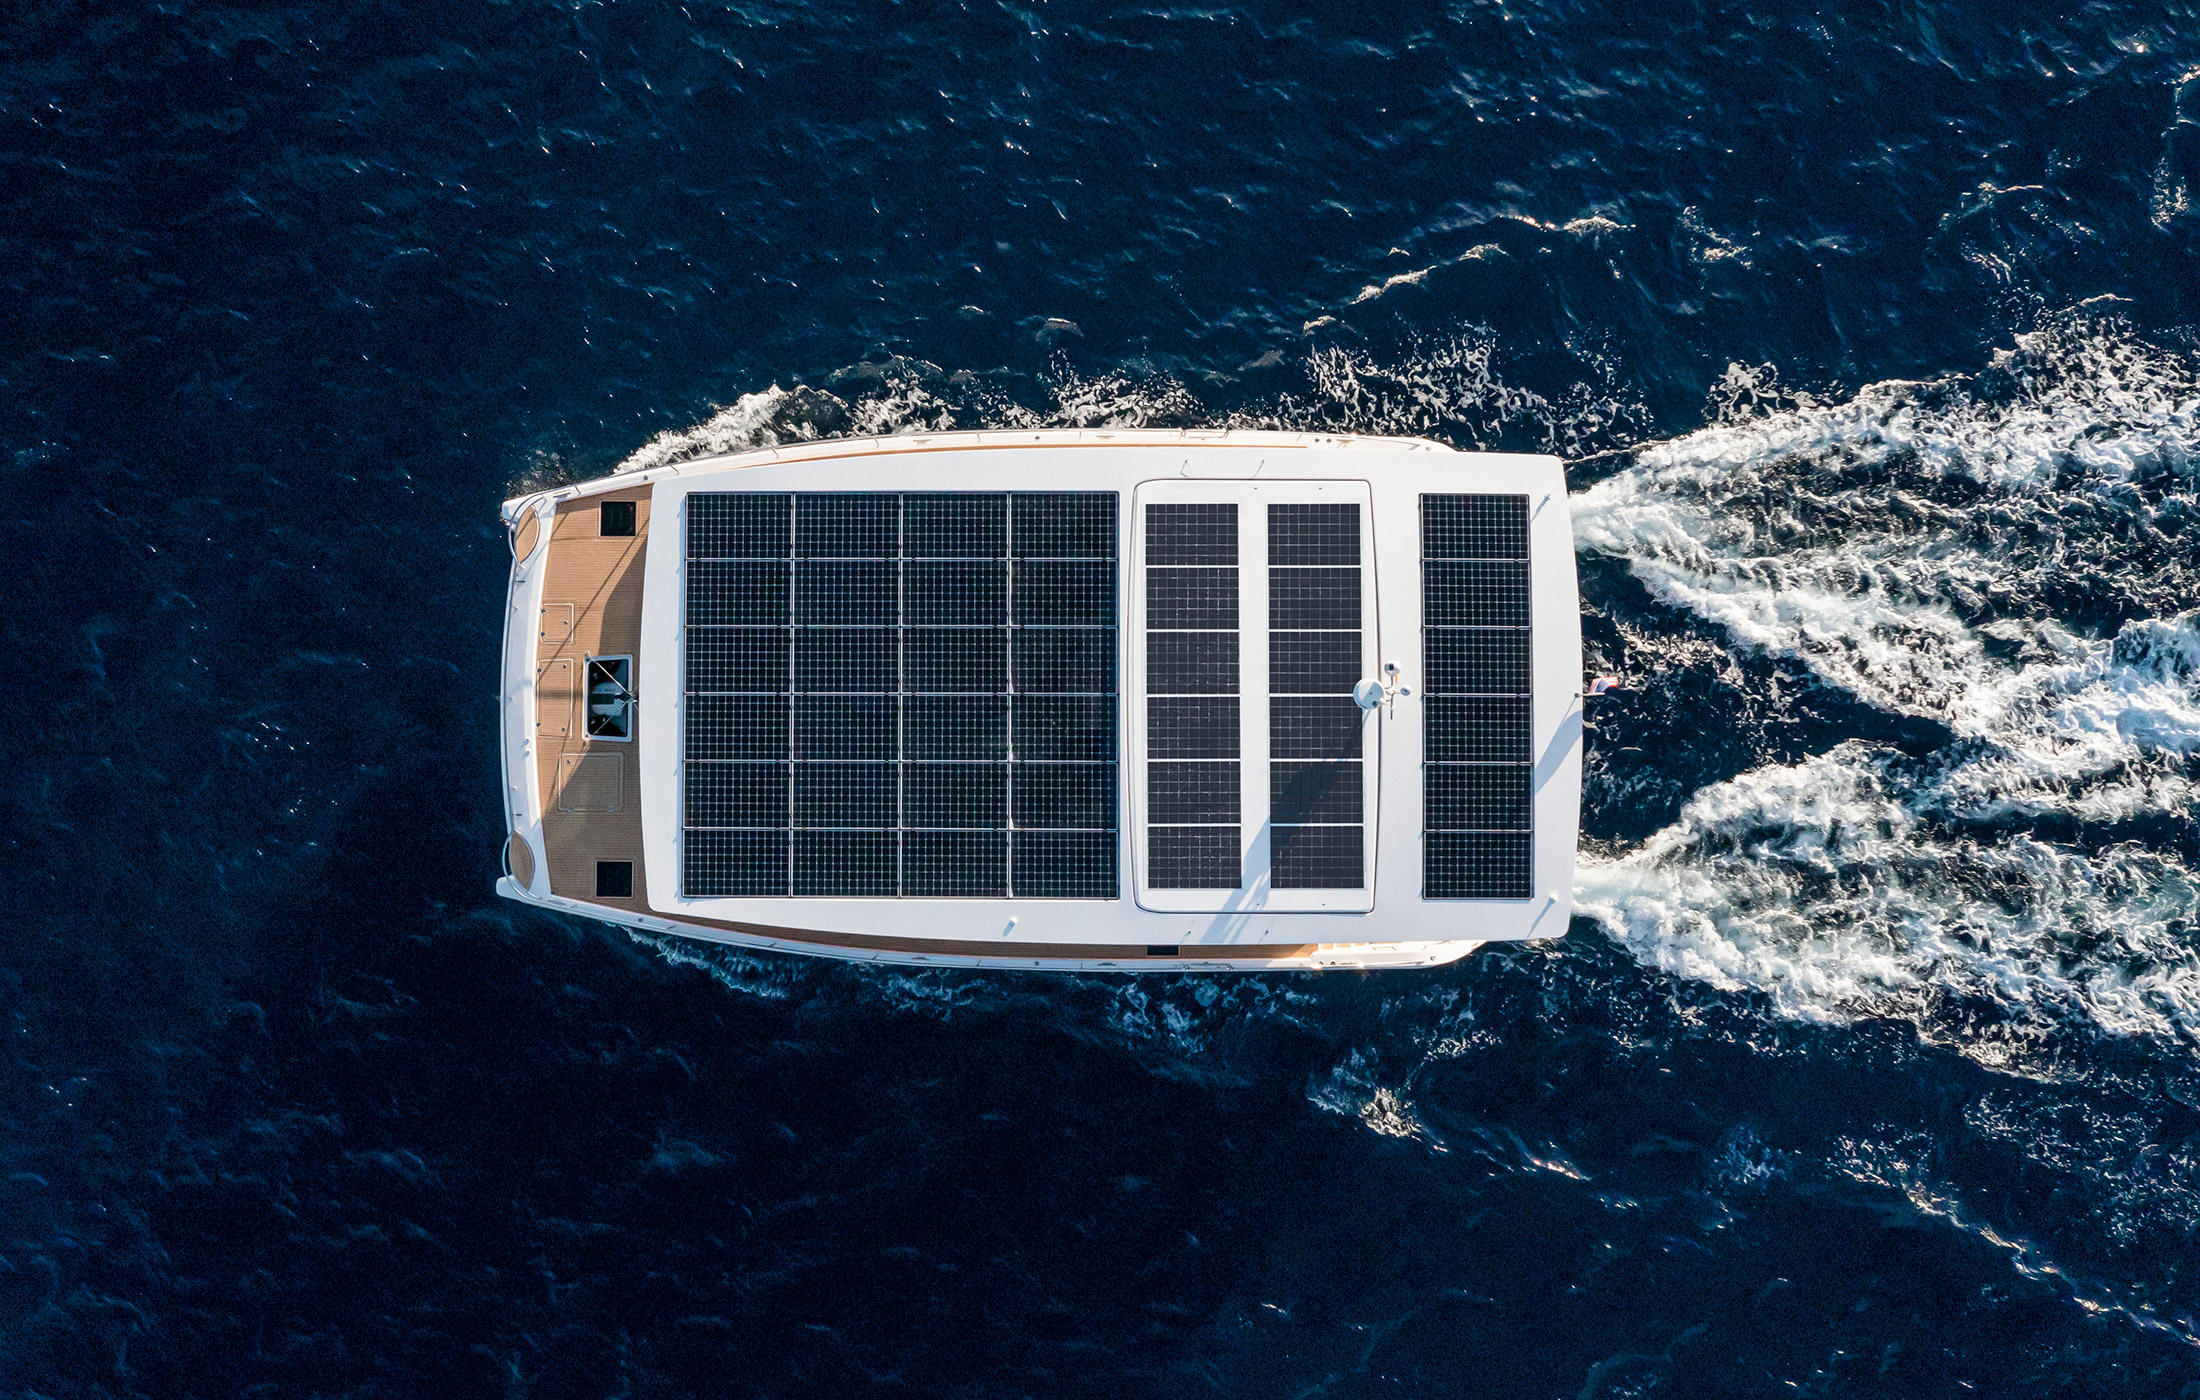 Silent yacht with solar panels on the roof sailing at high speed